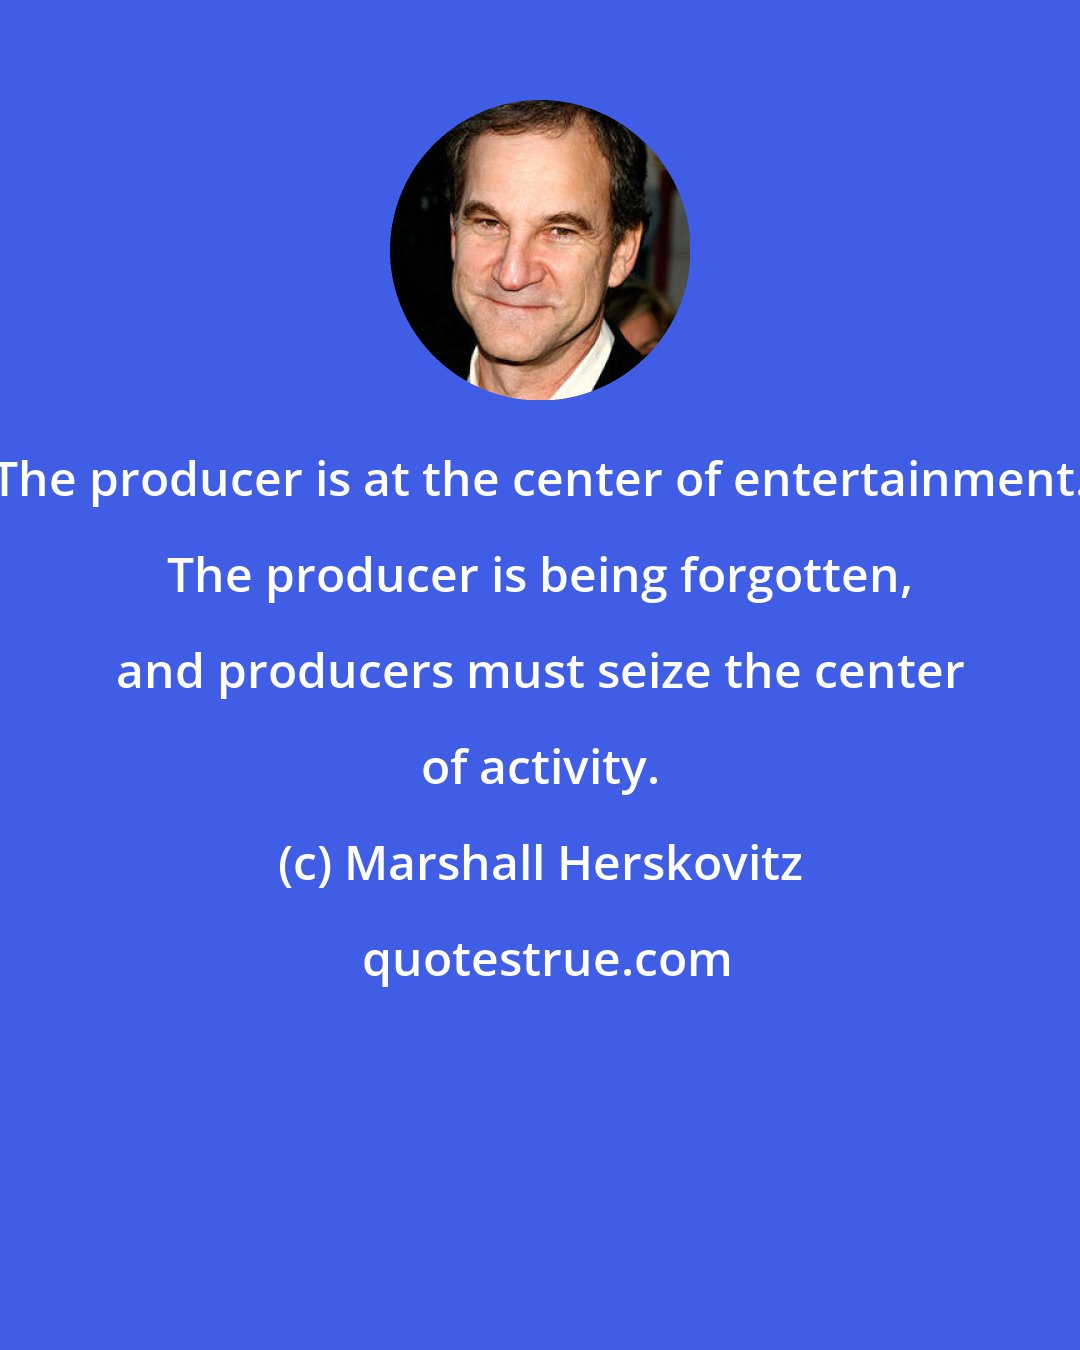 Marshall Herskovitz: The producer is at the center of entertainment. The producer is being forgotten, and producers must seize the center of activity.